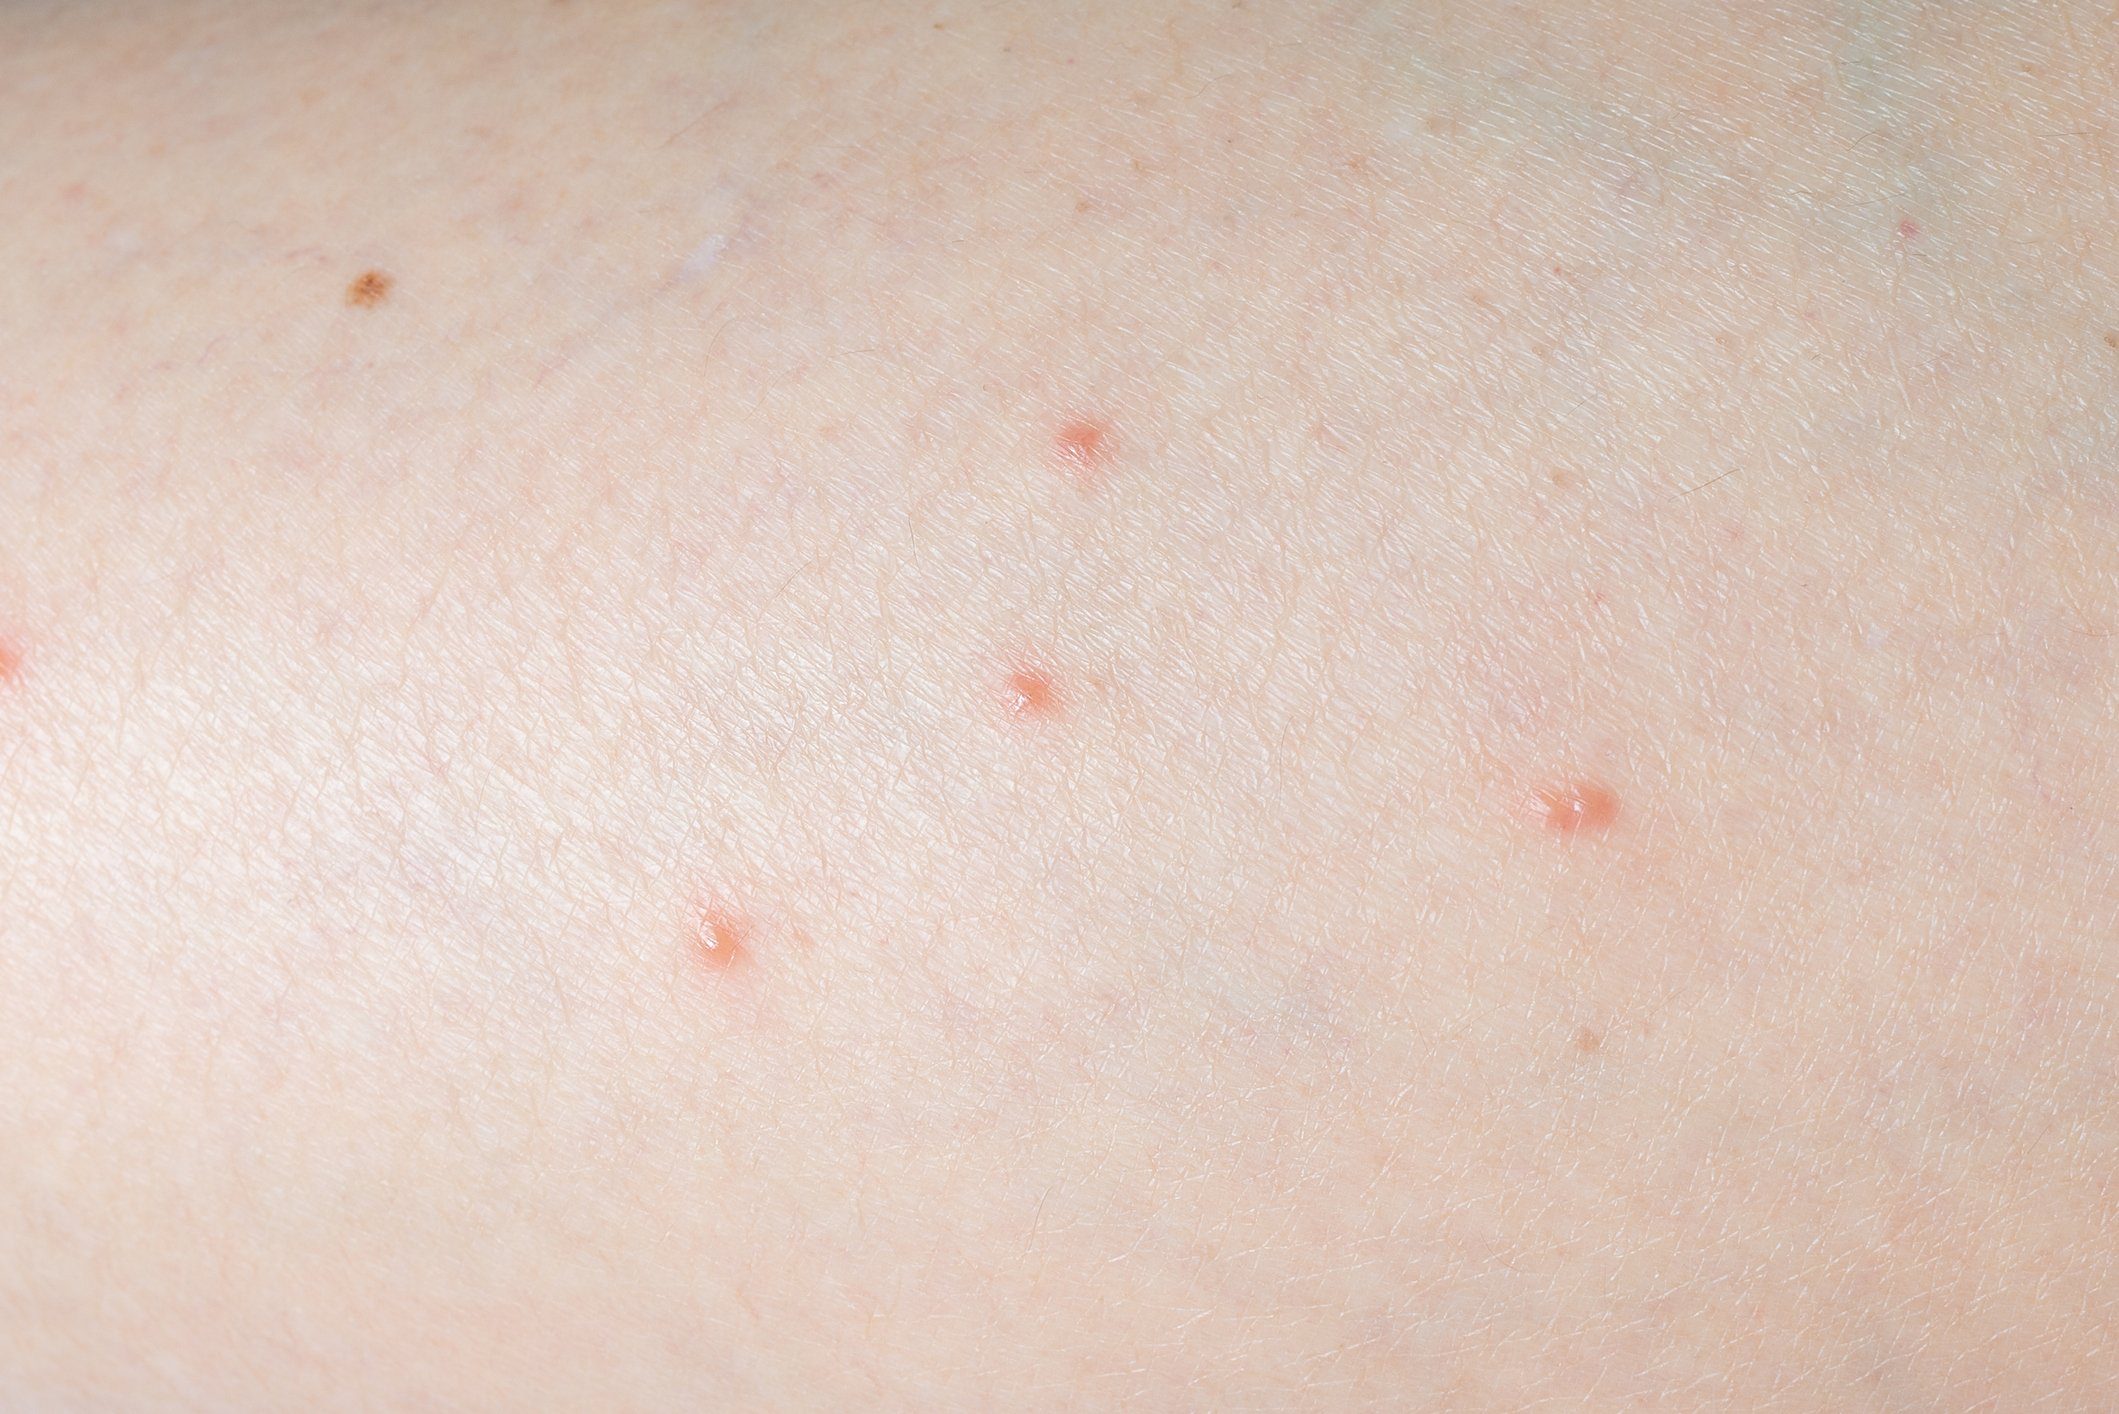 small insect bites on skin